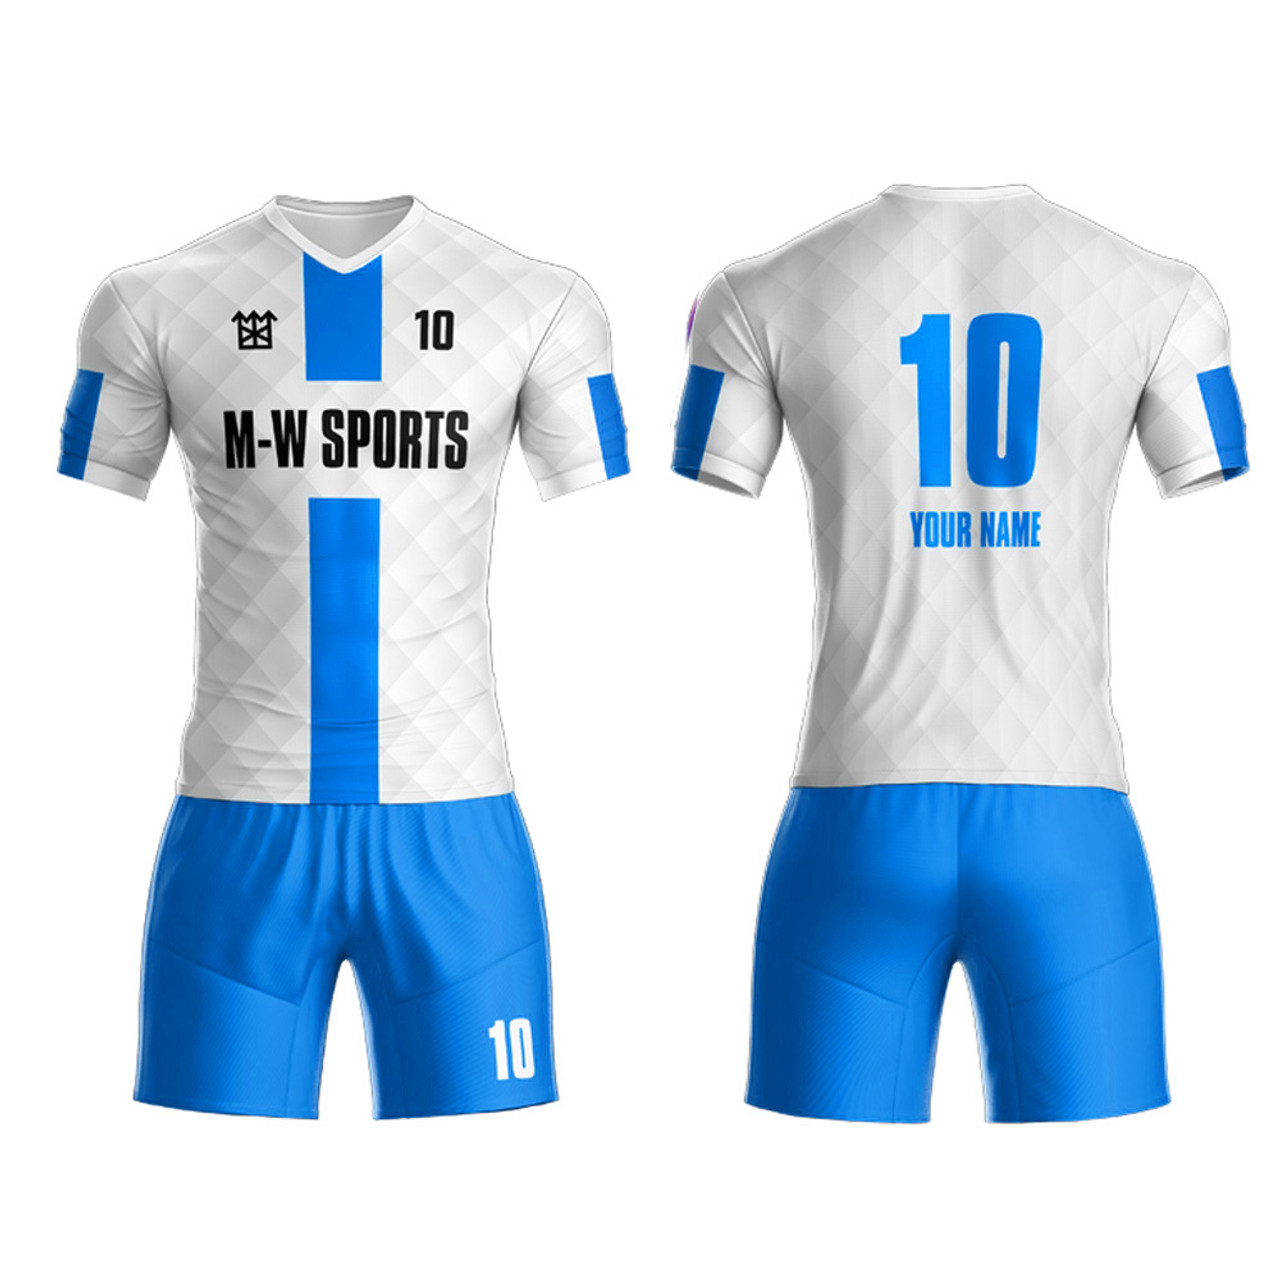 Football jersey design; add your team and mascot name: QFB-16 More